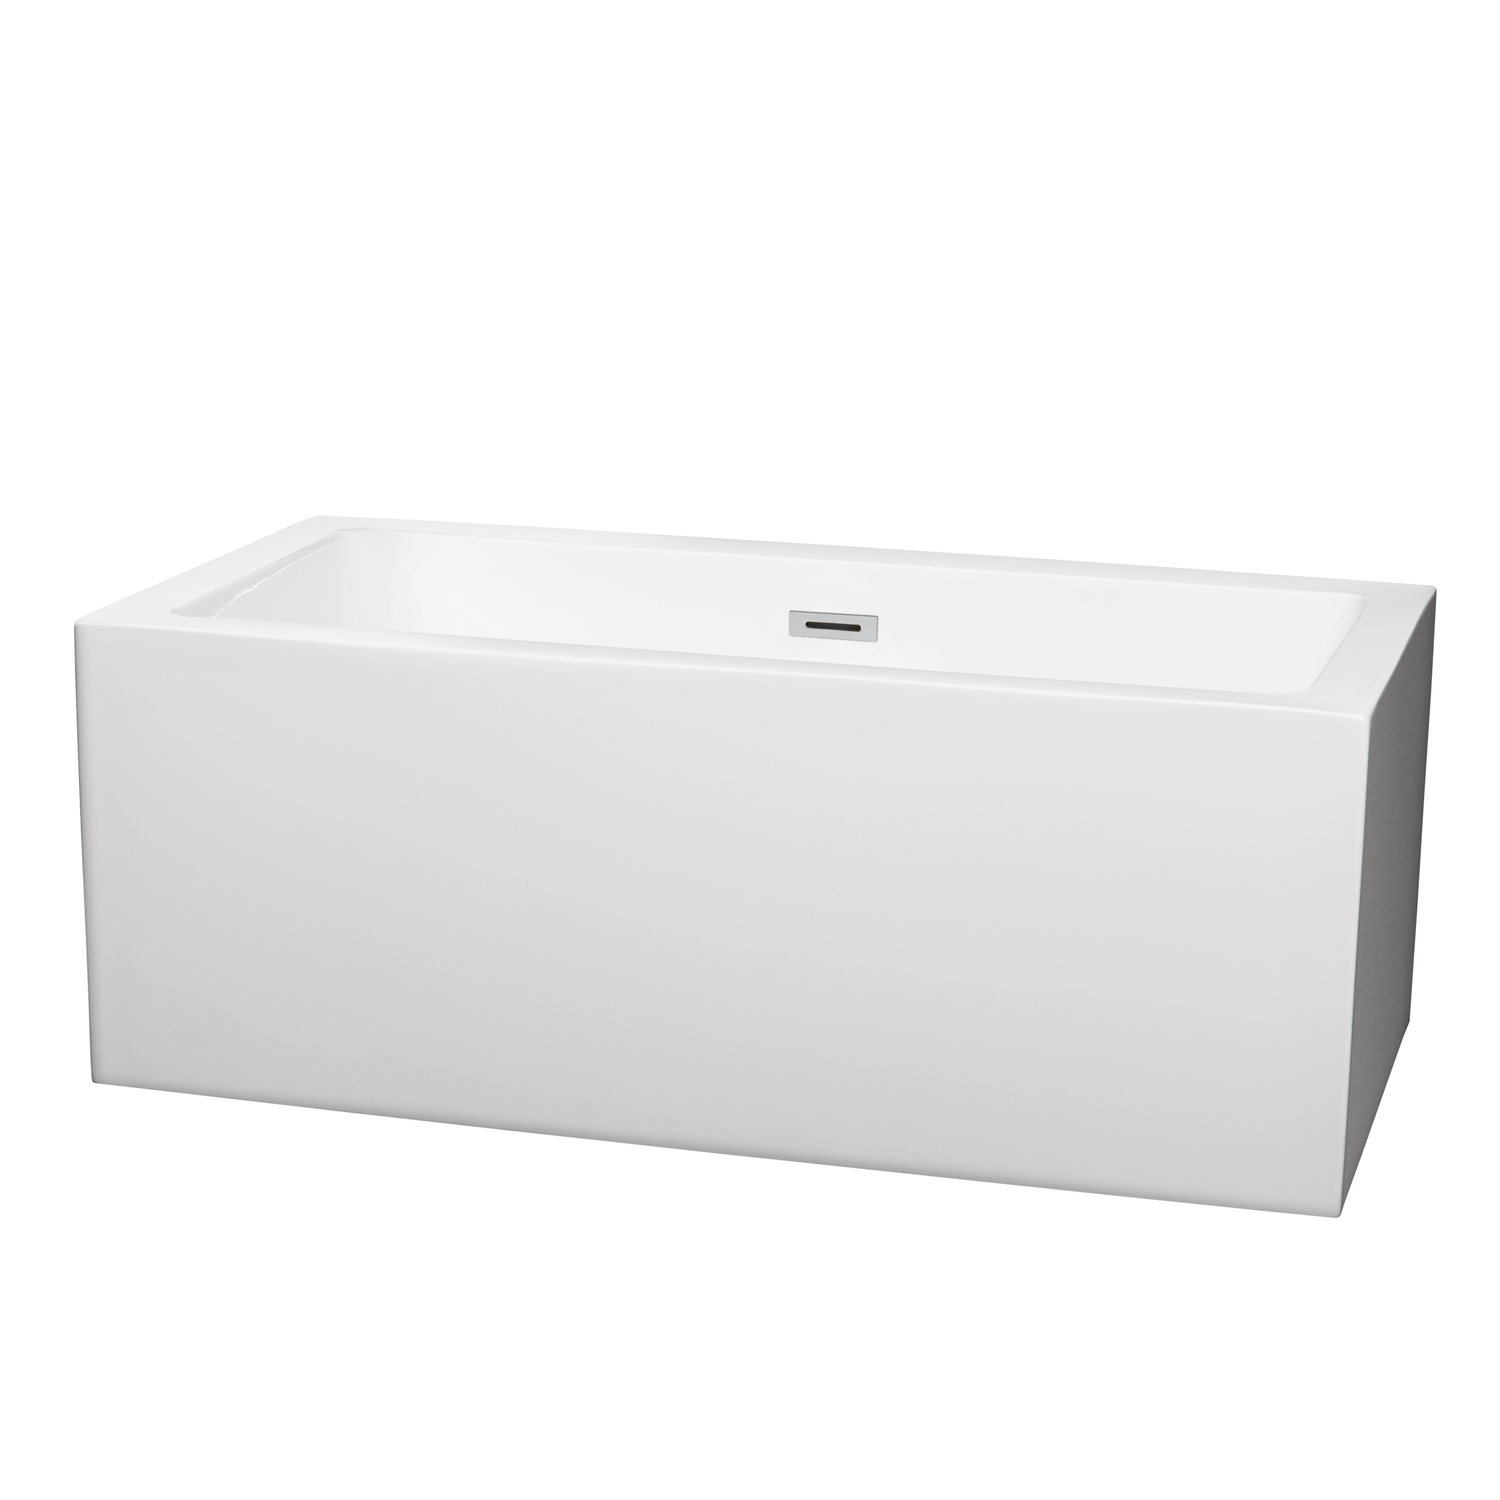 60" Freestanding Bathtub in White with Polished Chrome Drain and Overflow Trim with Faucet Option